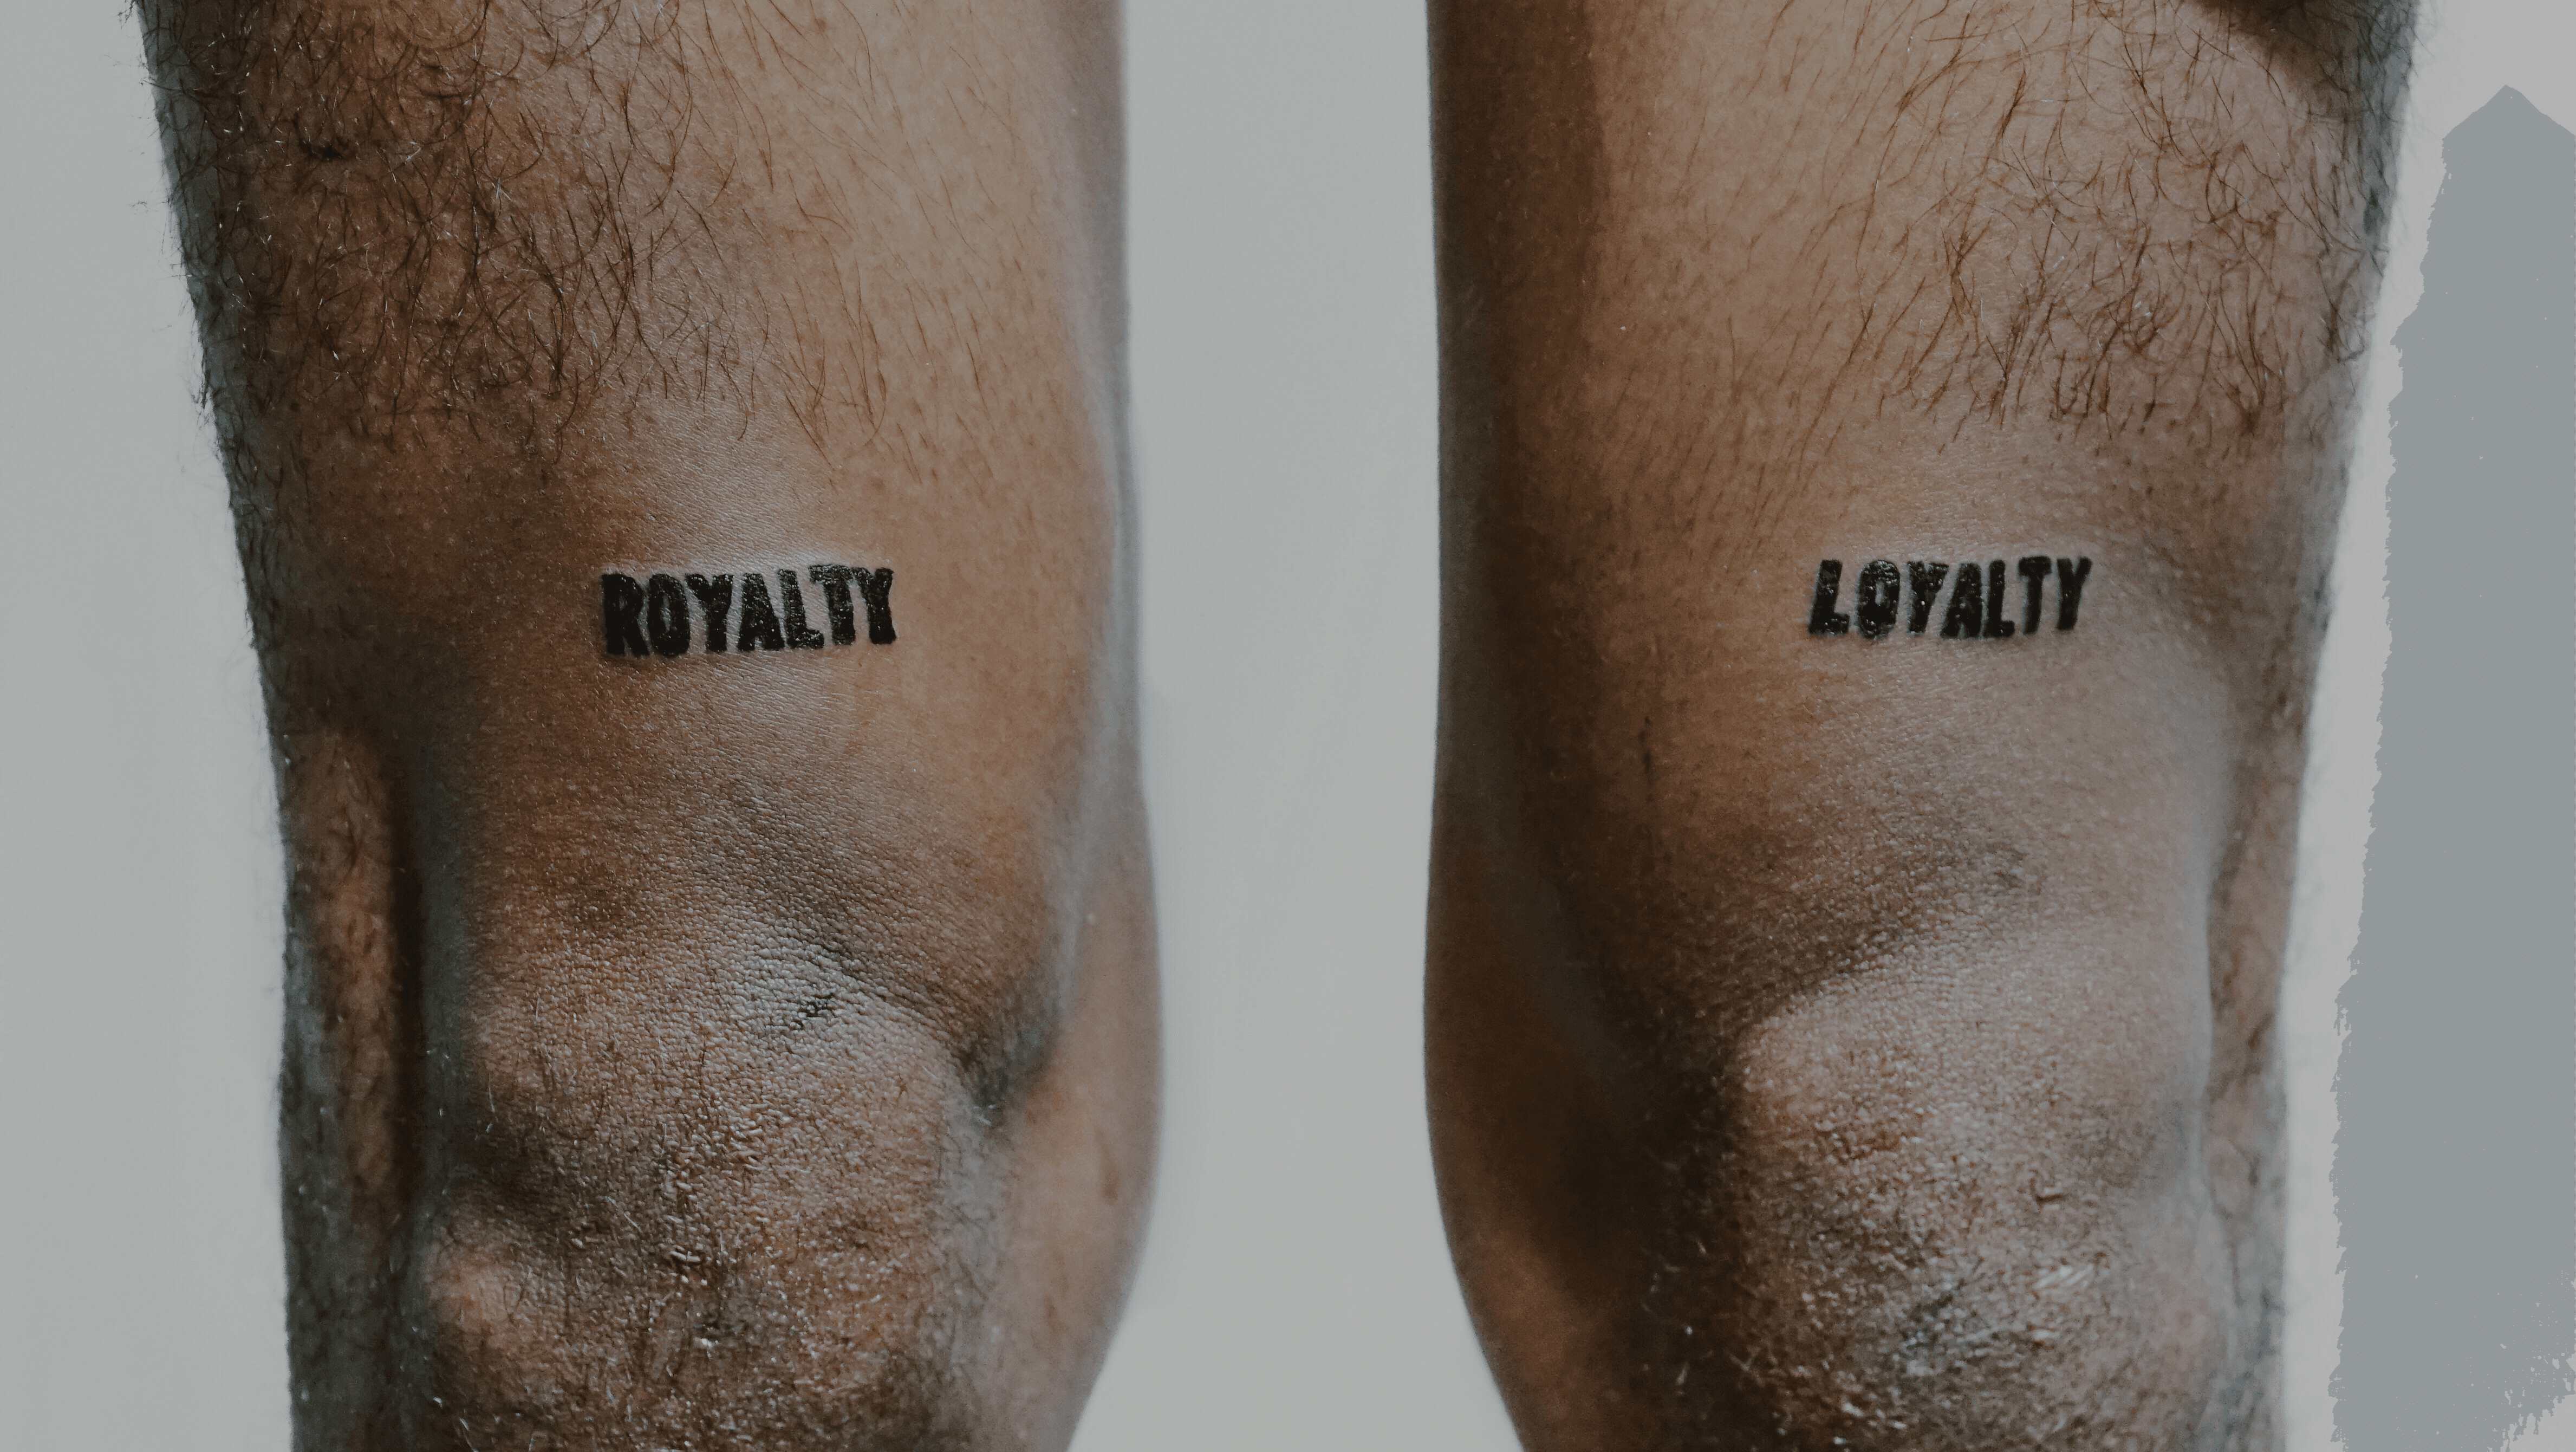 Pozos  LOYALTY OVER ROYALTY tattoo from Friday set your appointments walk  ins welcome savageink blackandgrey tattoo tattoos bishoprotory  microangelo dovetattoo loyaltyoverroyalty houstontattooartist houston  texas peeweetattz6712 cypress 